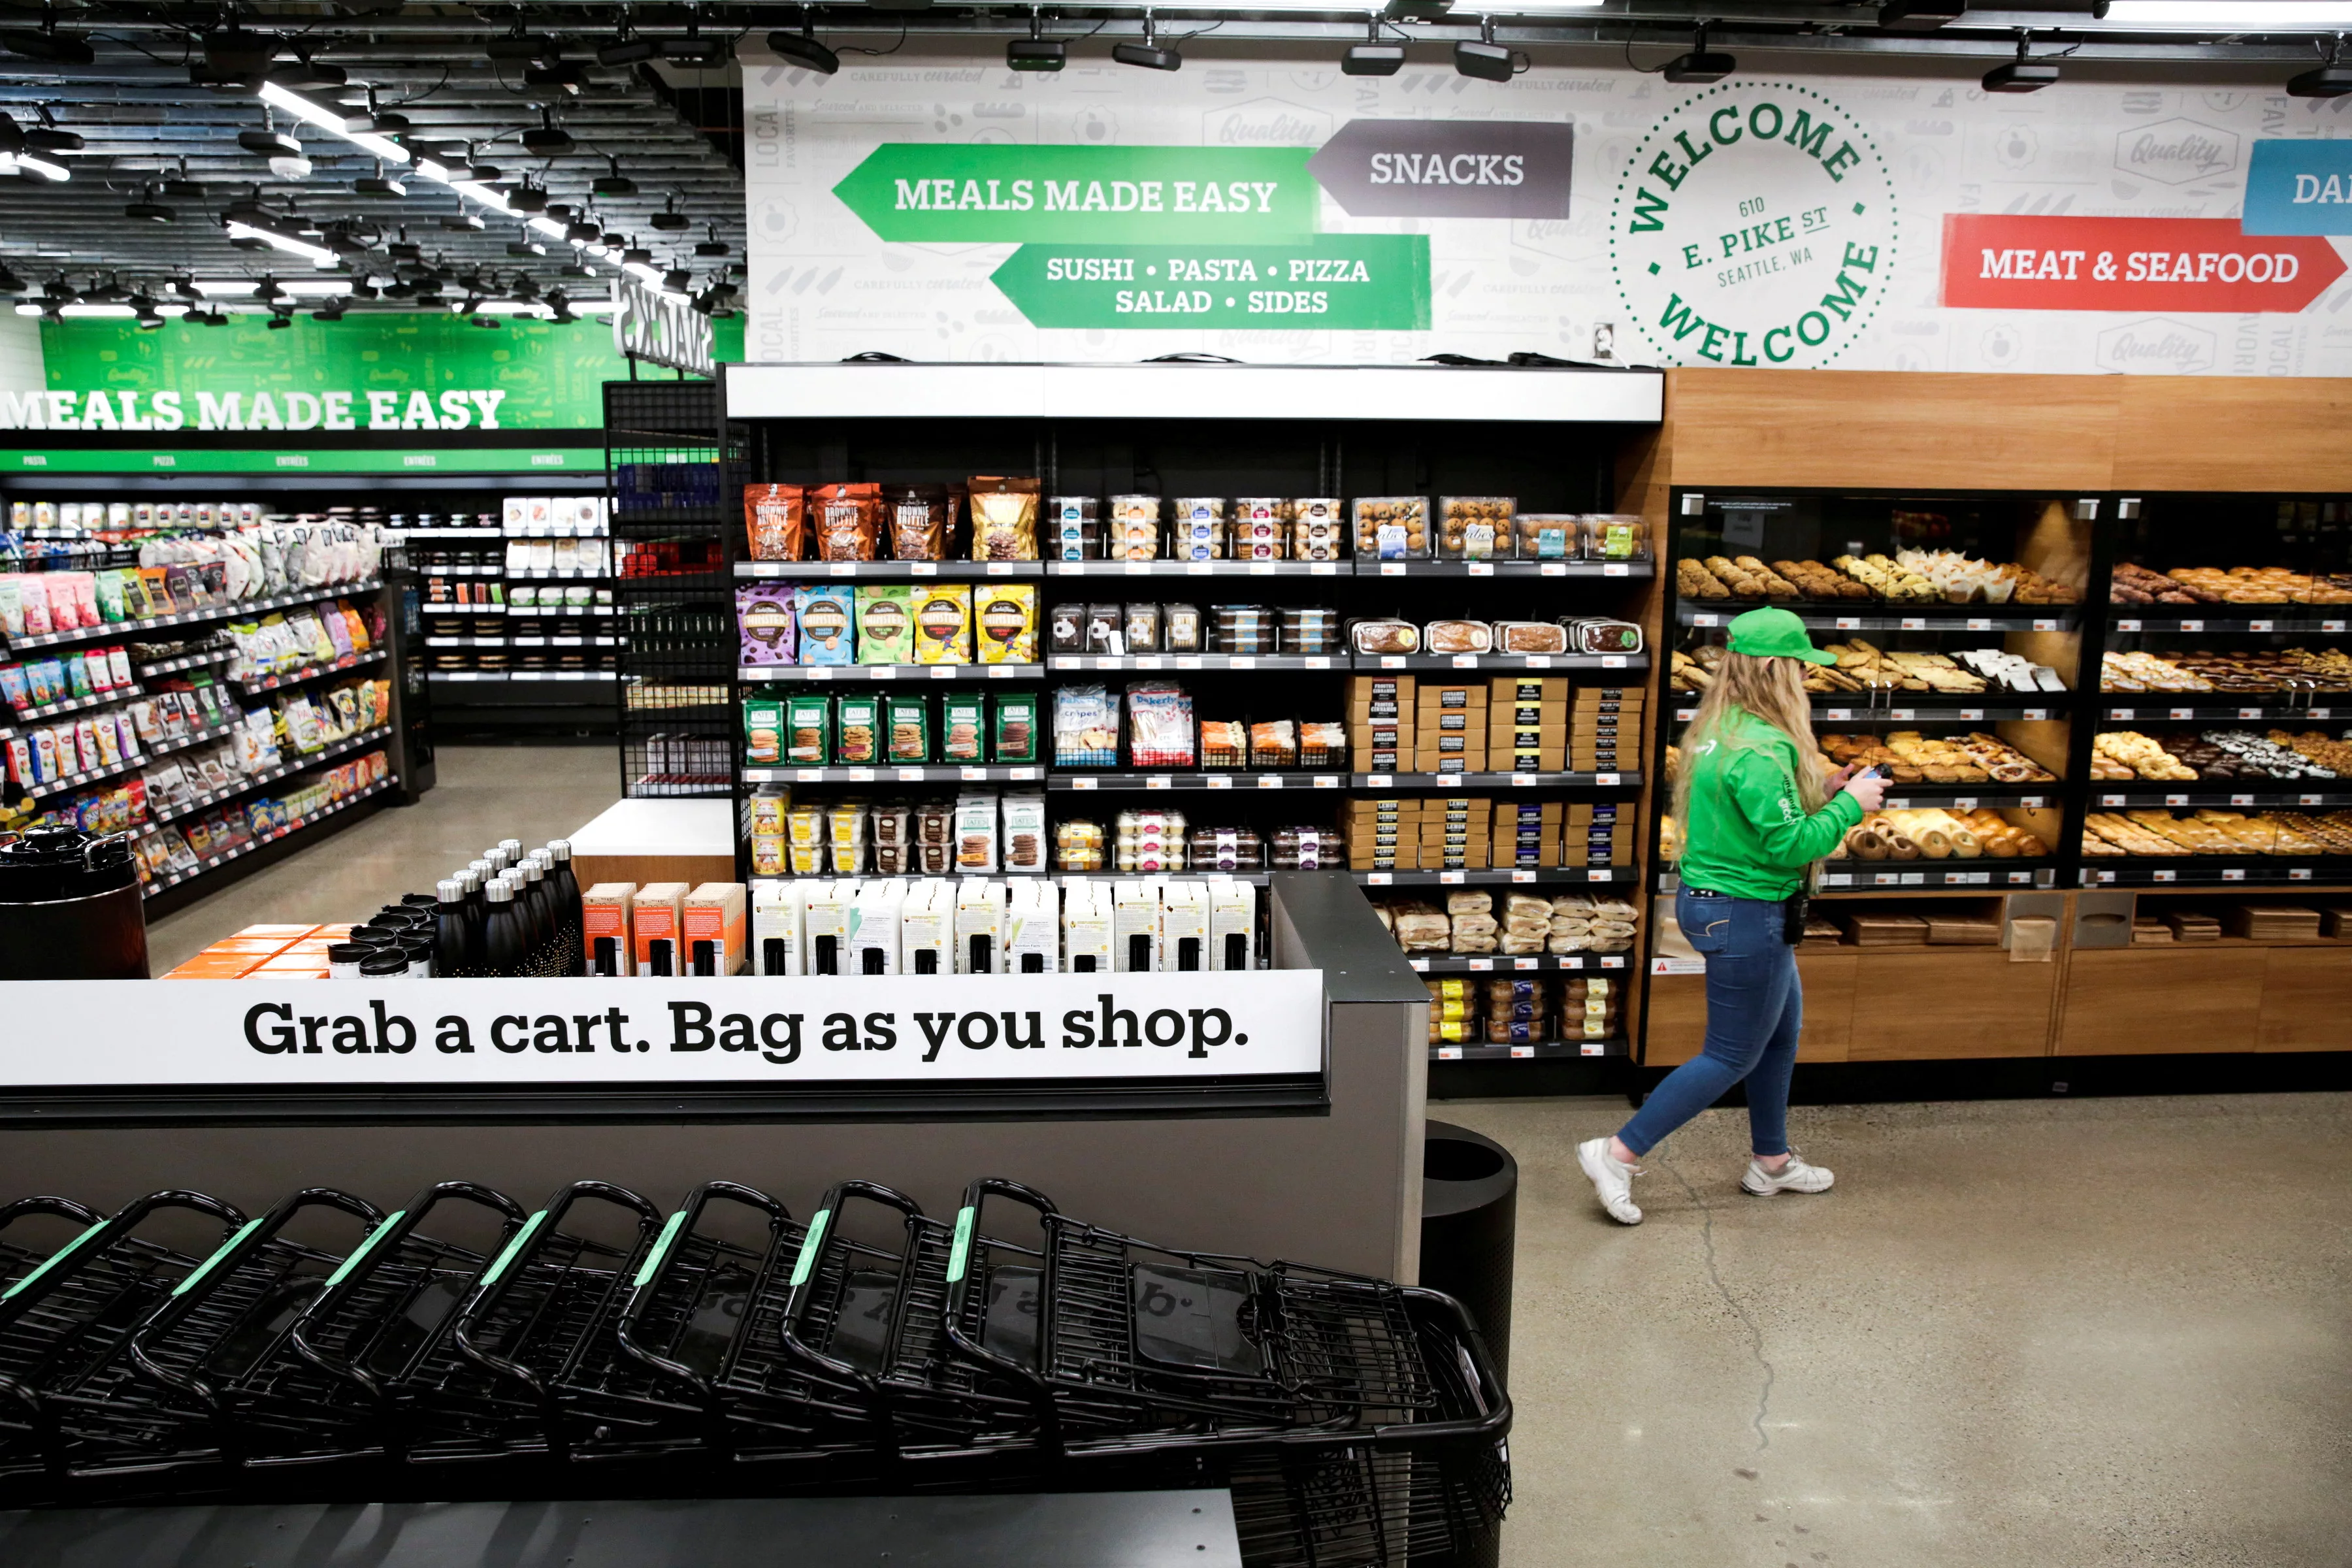 file-photo-an-amazon-checkout-free-large-format-grocery-store-is-pictured-during-a-tour-in-seattle